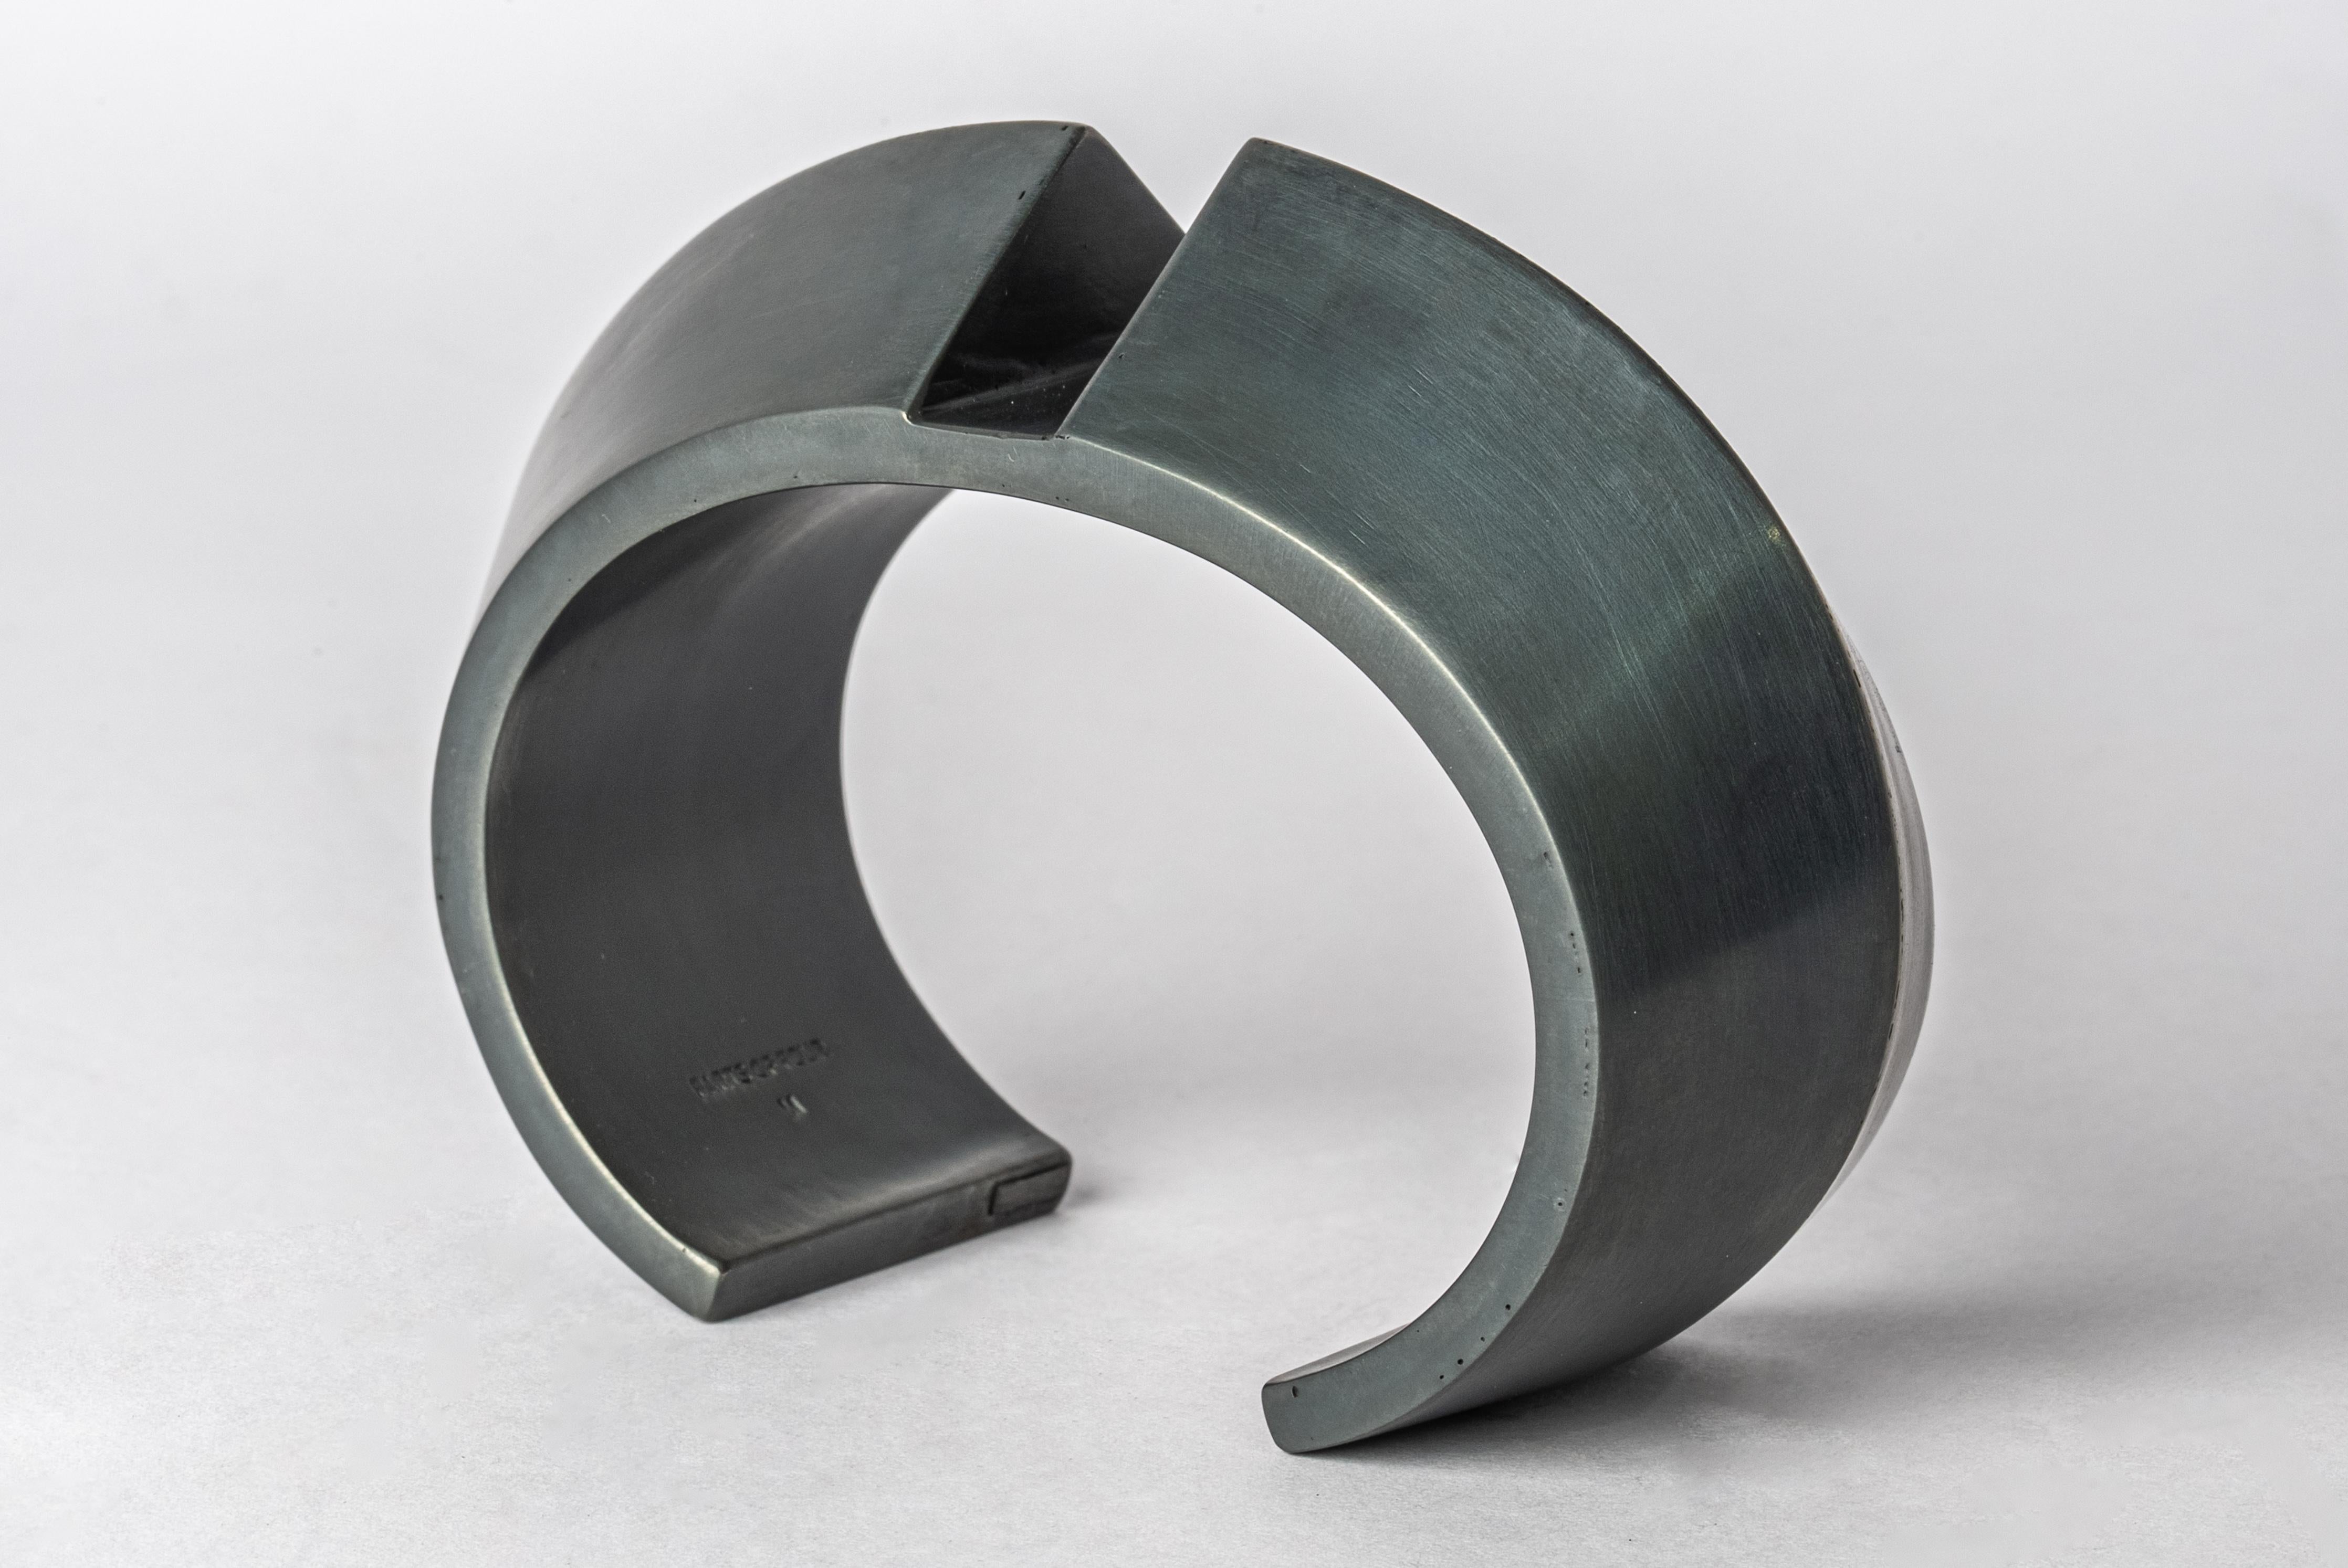 Bracelet in oxidized silver plated brass. This piece is 100% hand fabricated from metal plate; cut into sections and soldered together to make the hollow three dimensional form.